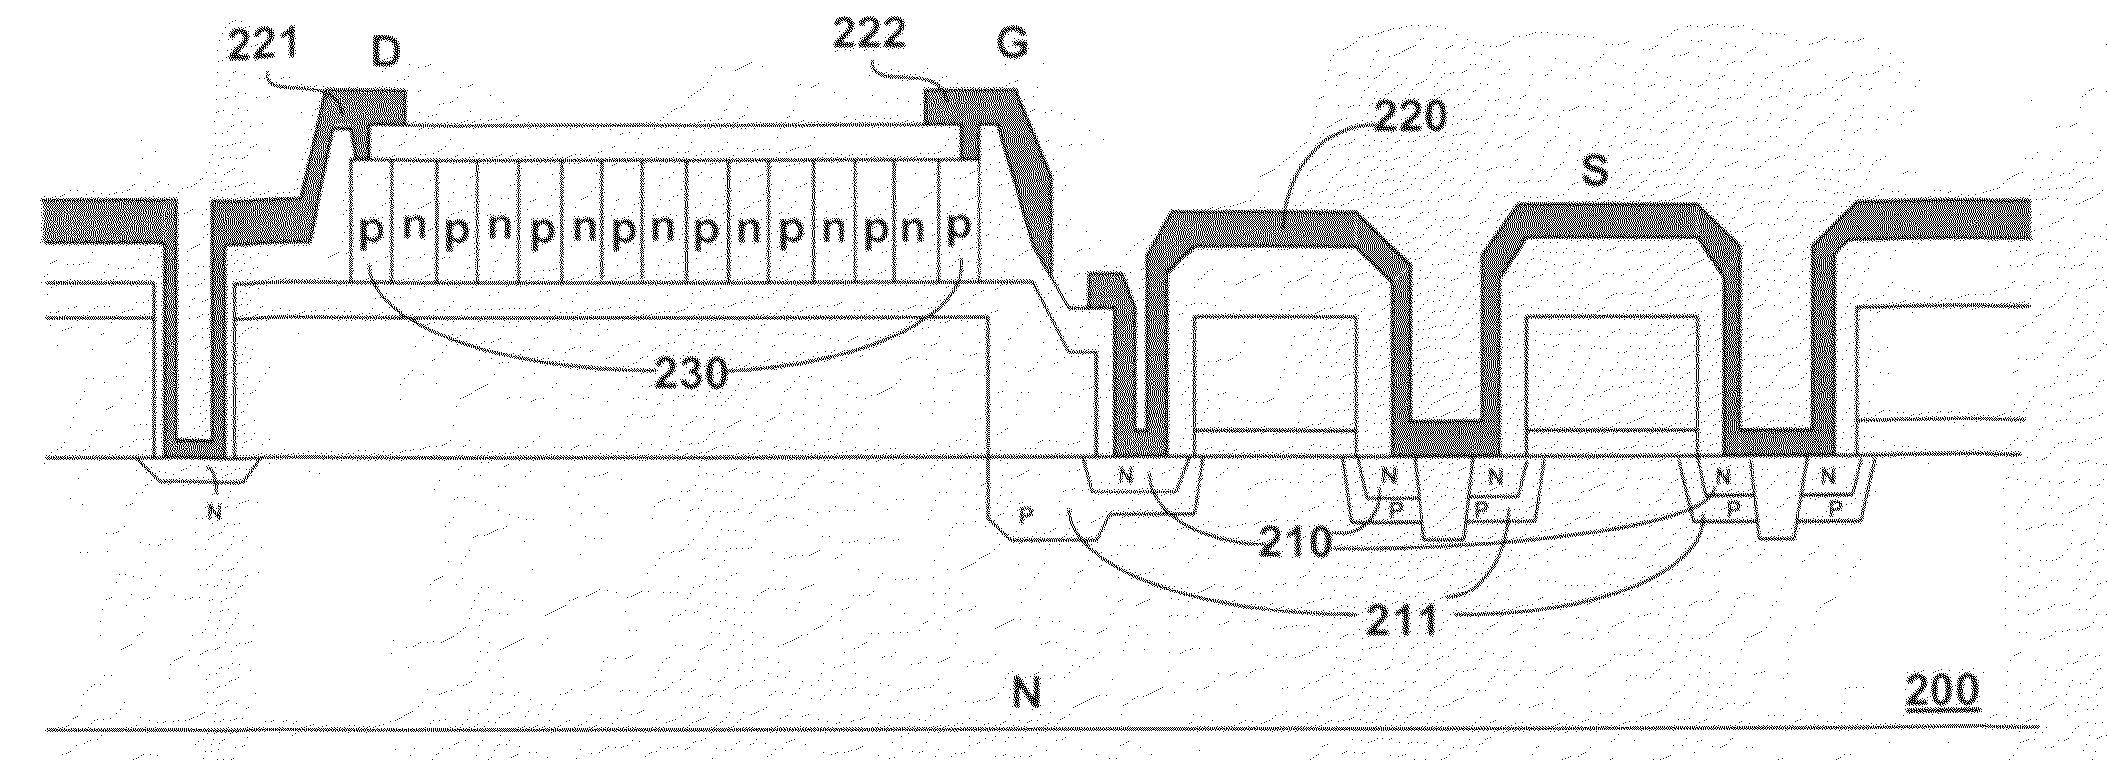 Power semiconductor devices integrated with clamp diodes sharing same gate metal pad